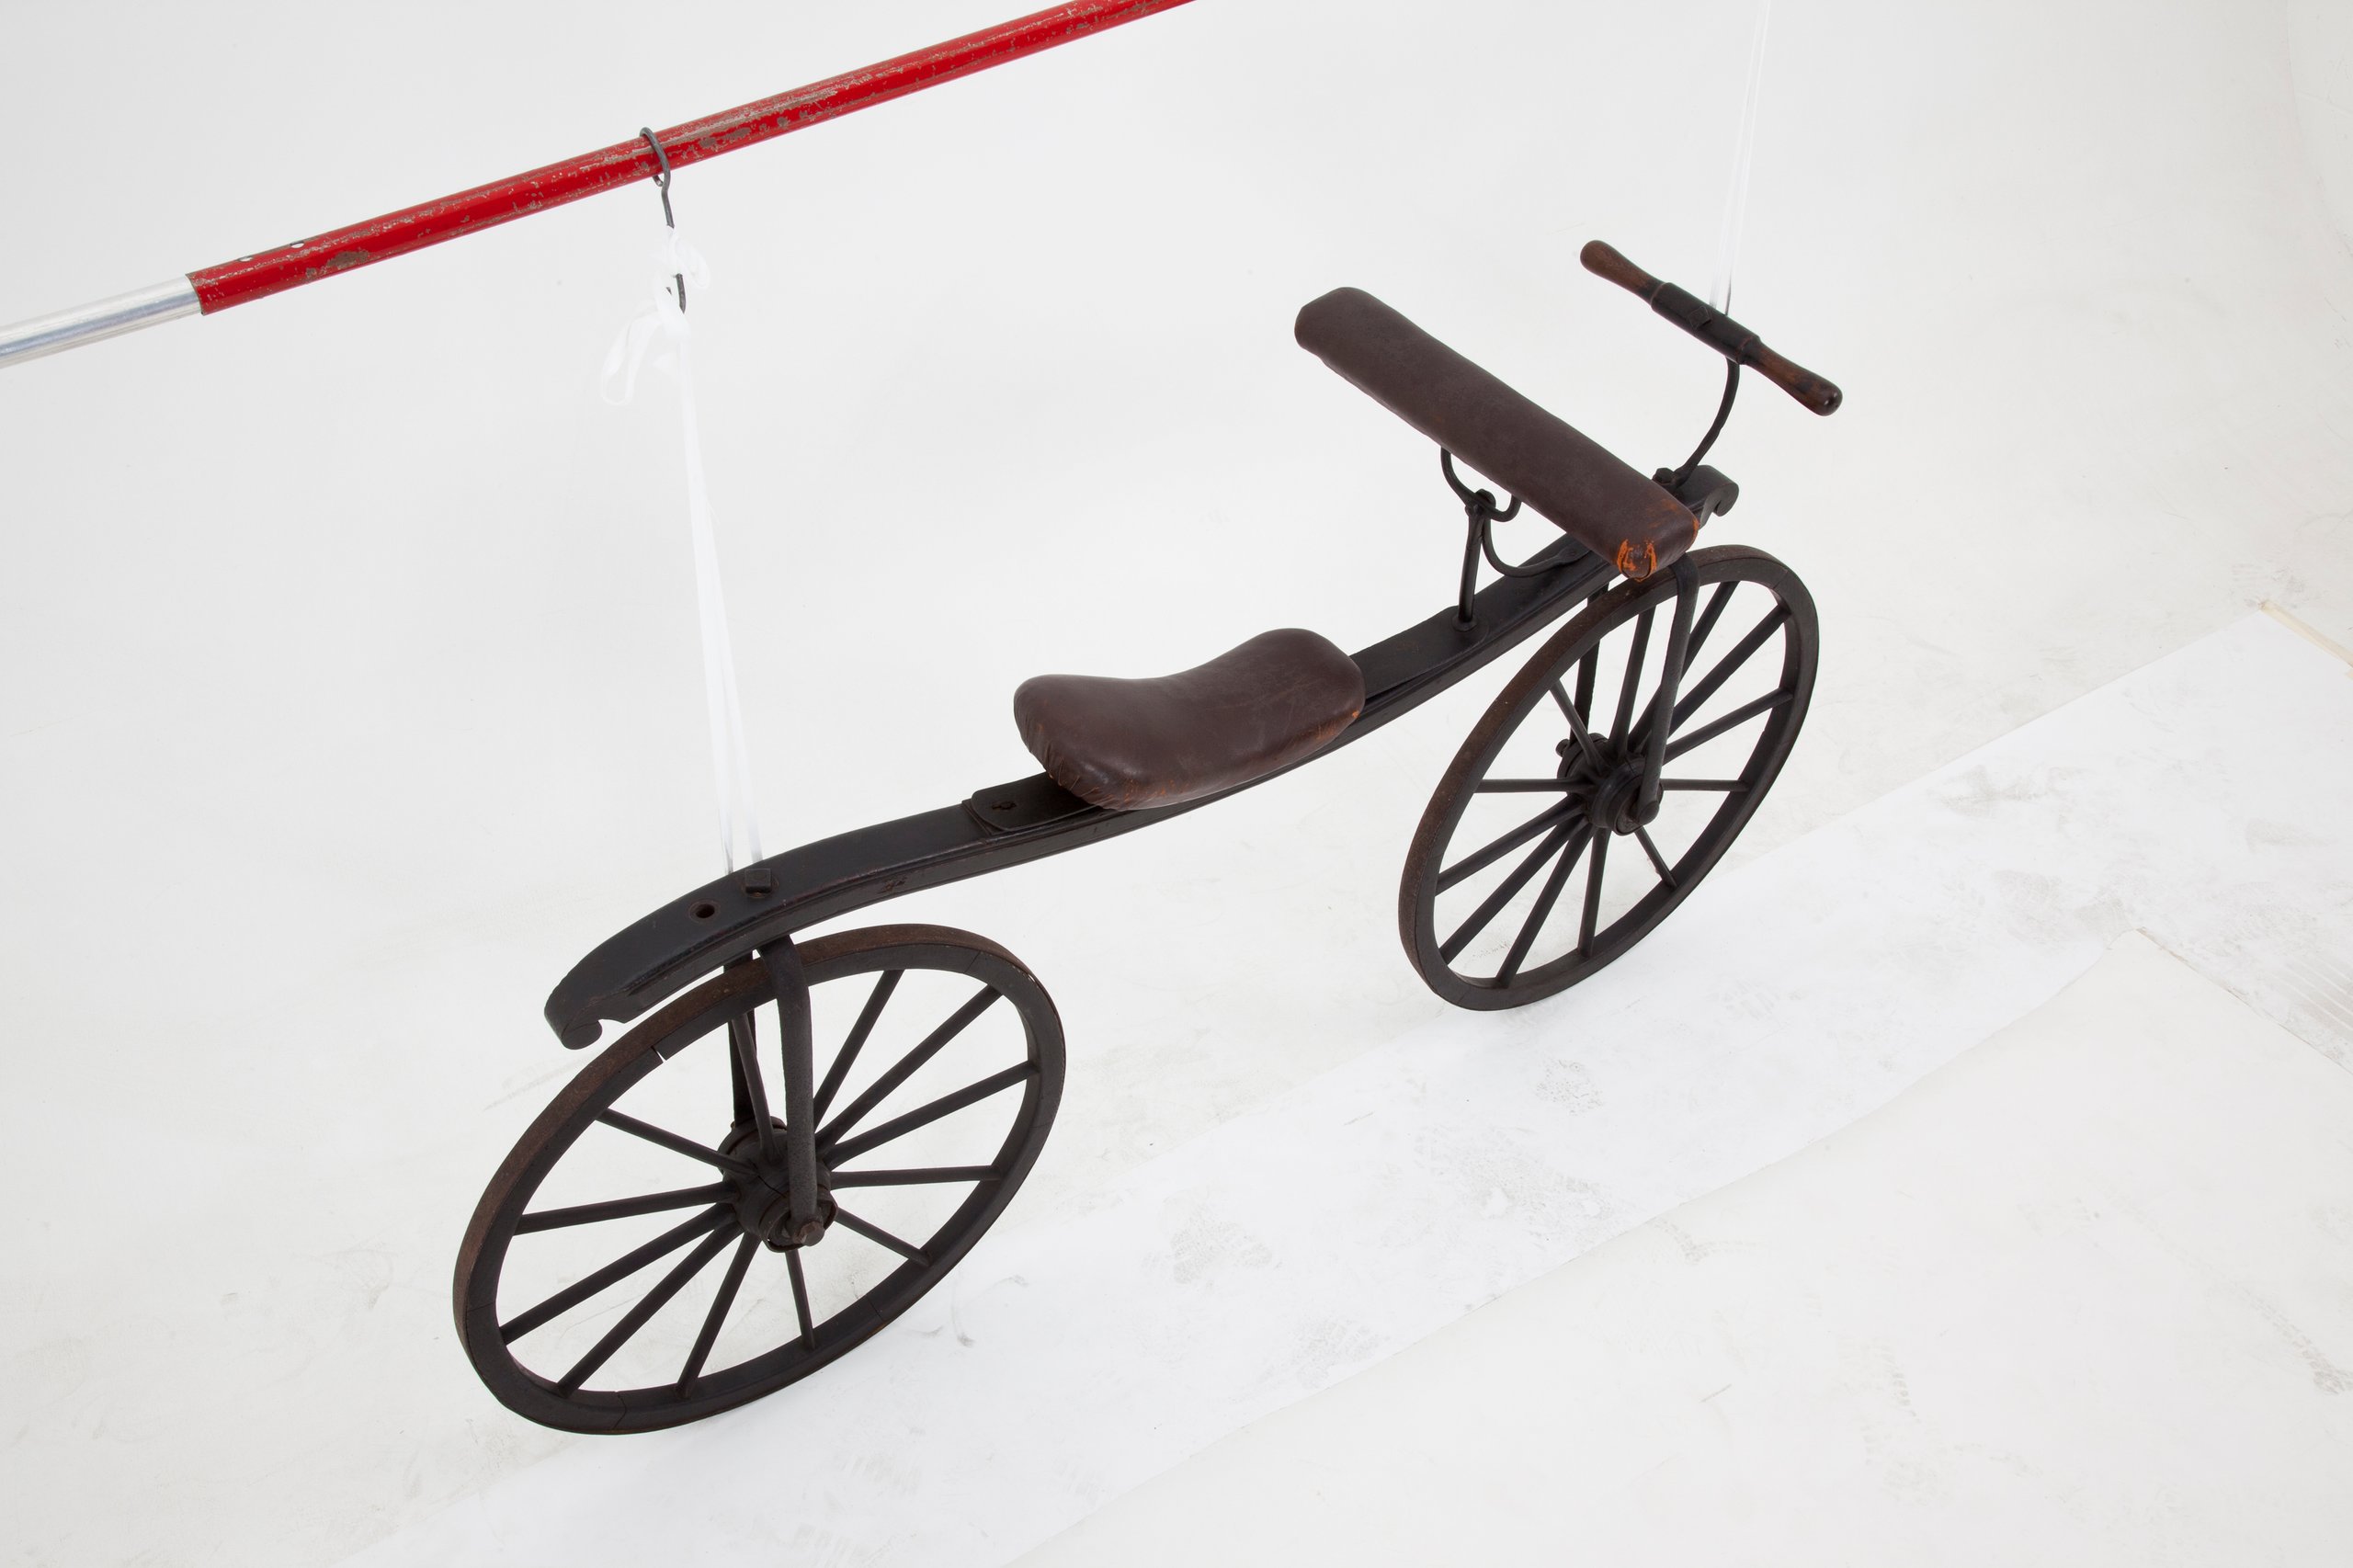 Reproduction Draisine or hobby horse bicycle